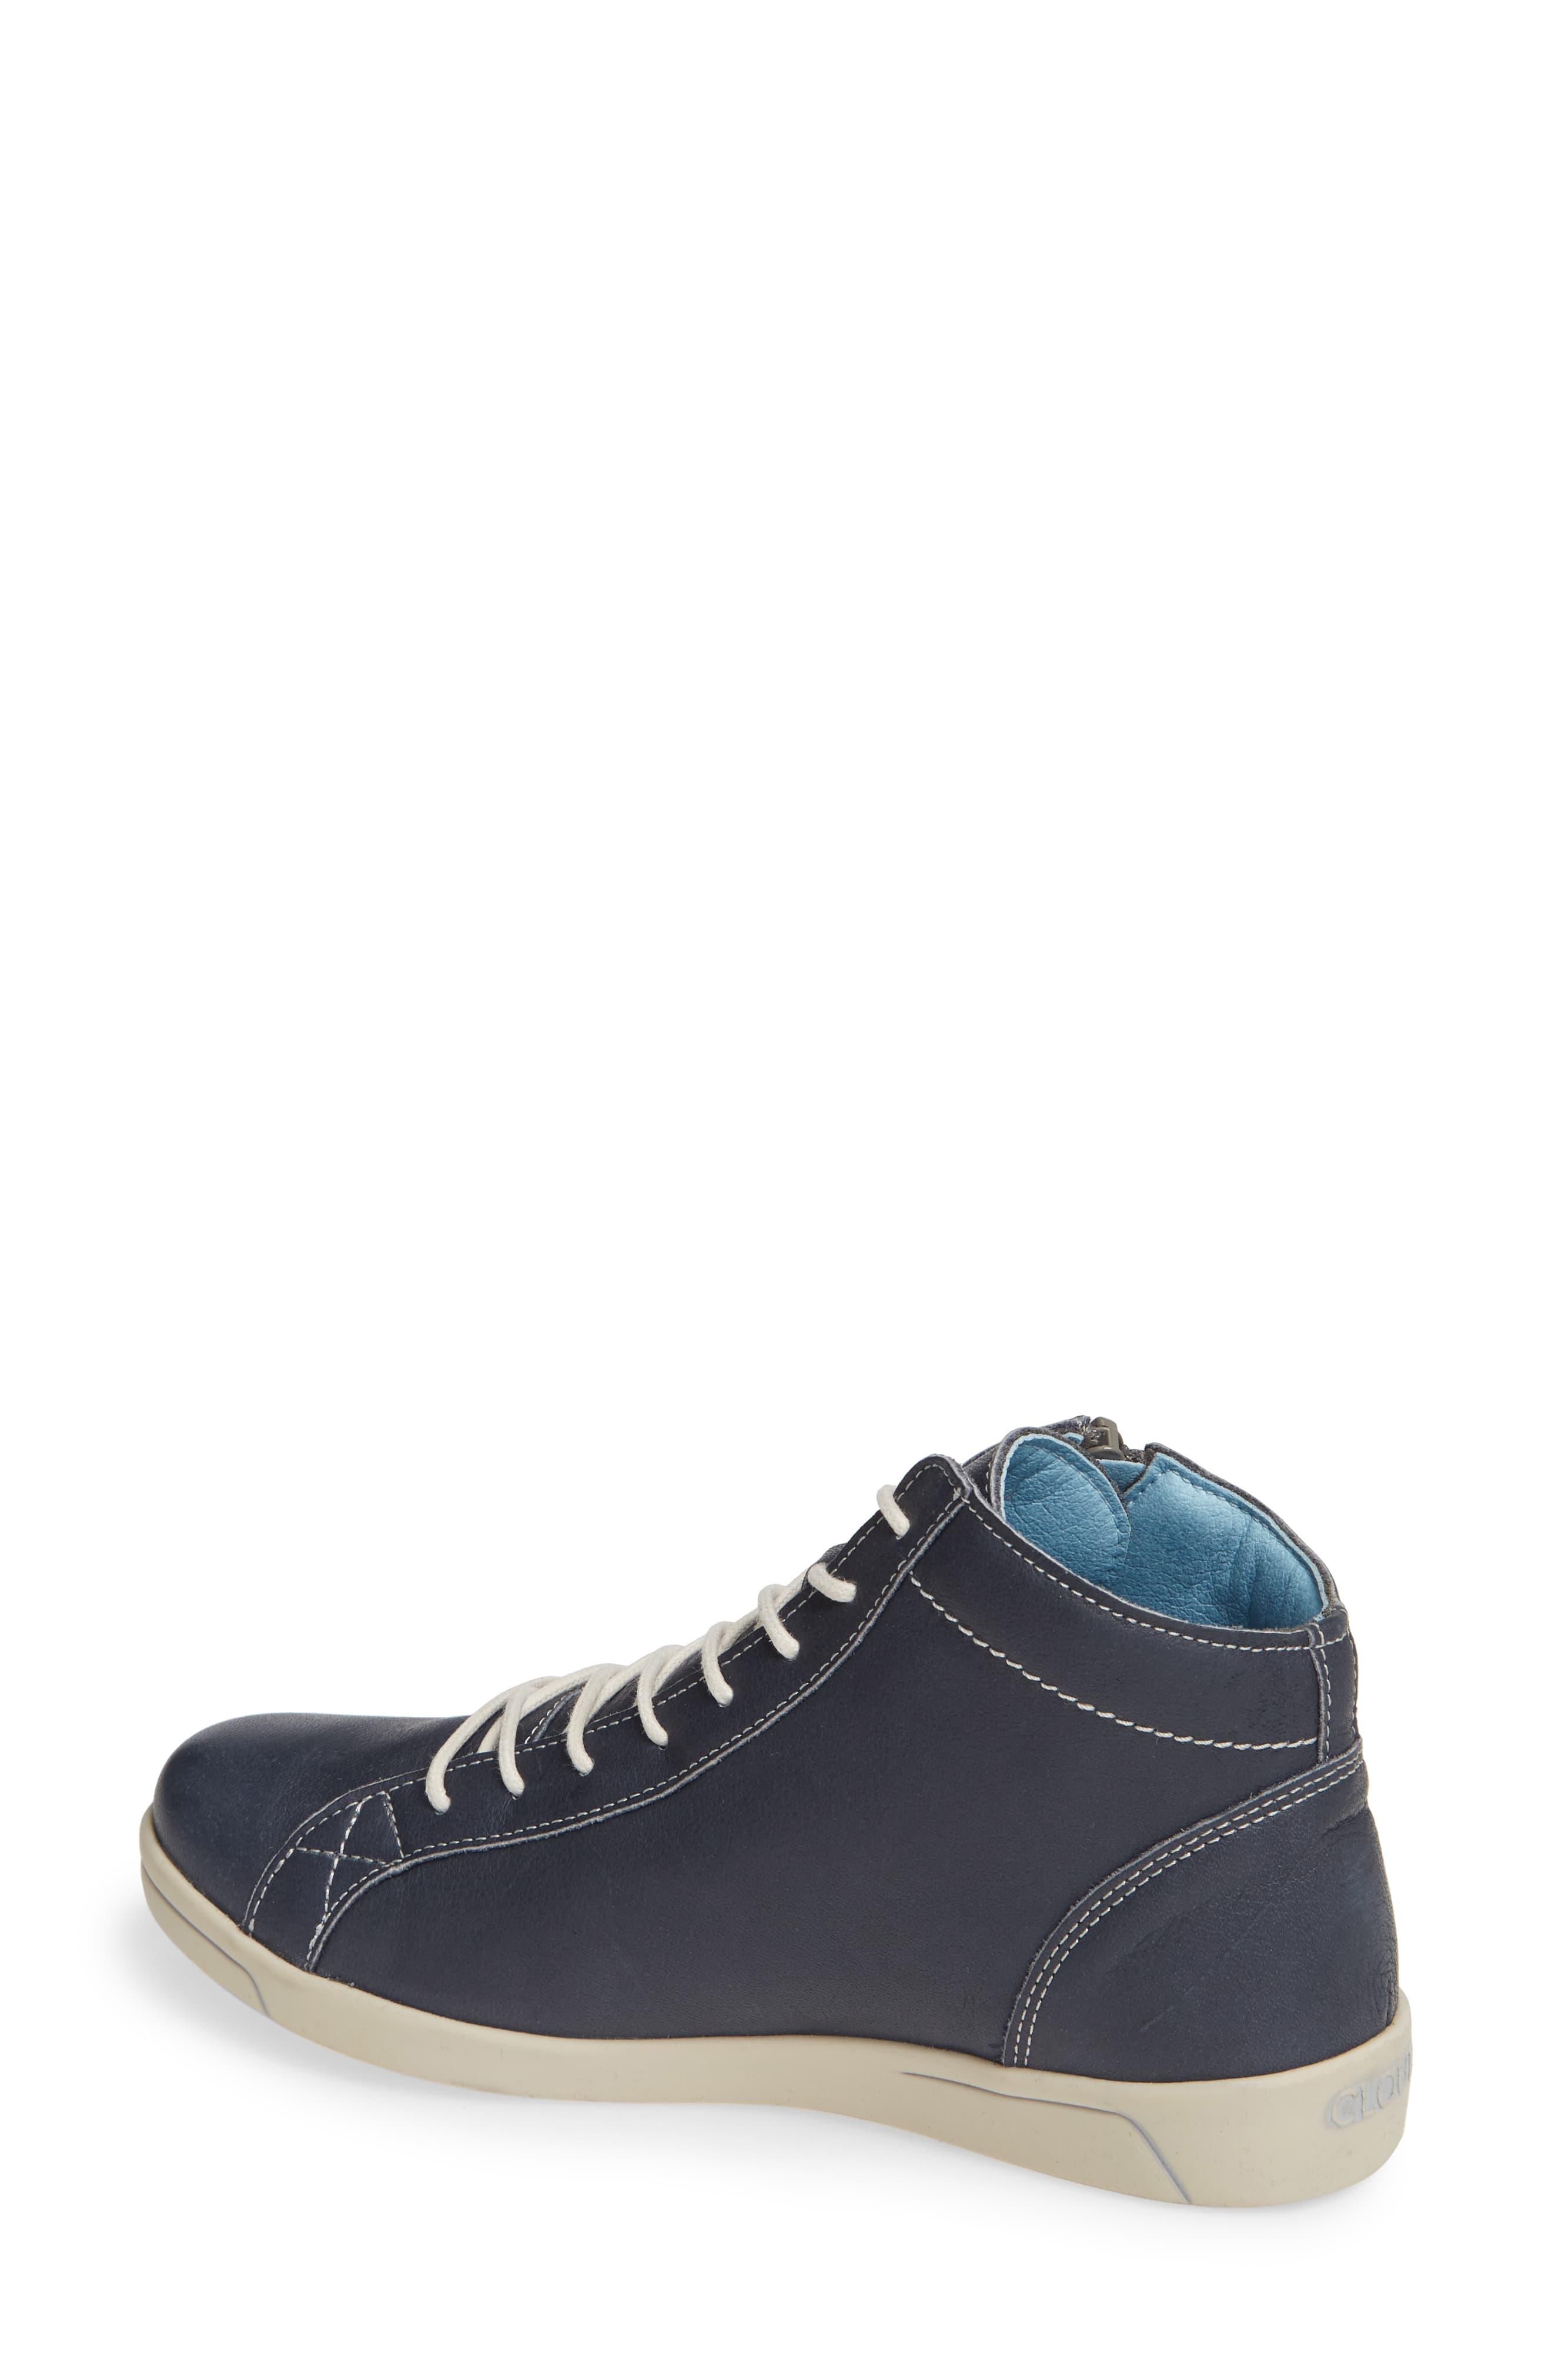 Cloud Aika High Top Sneaker in Blue Brushed Leather (Blue) - Save 15% ...